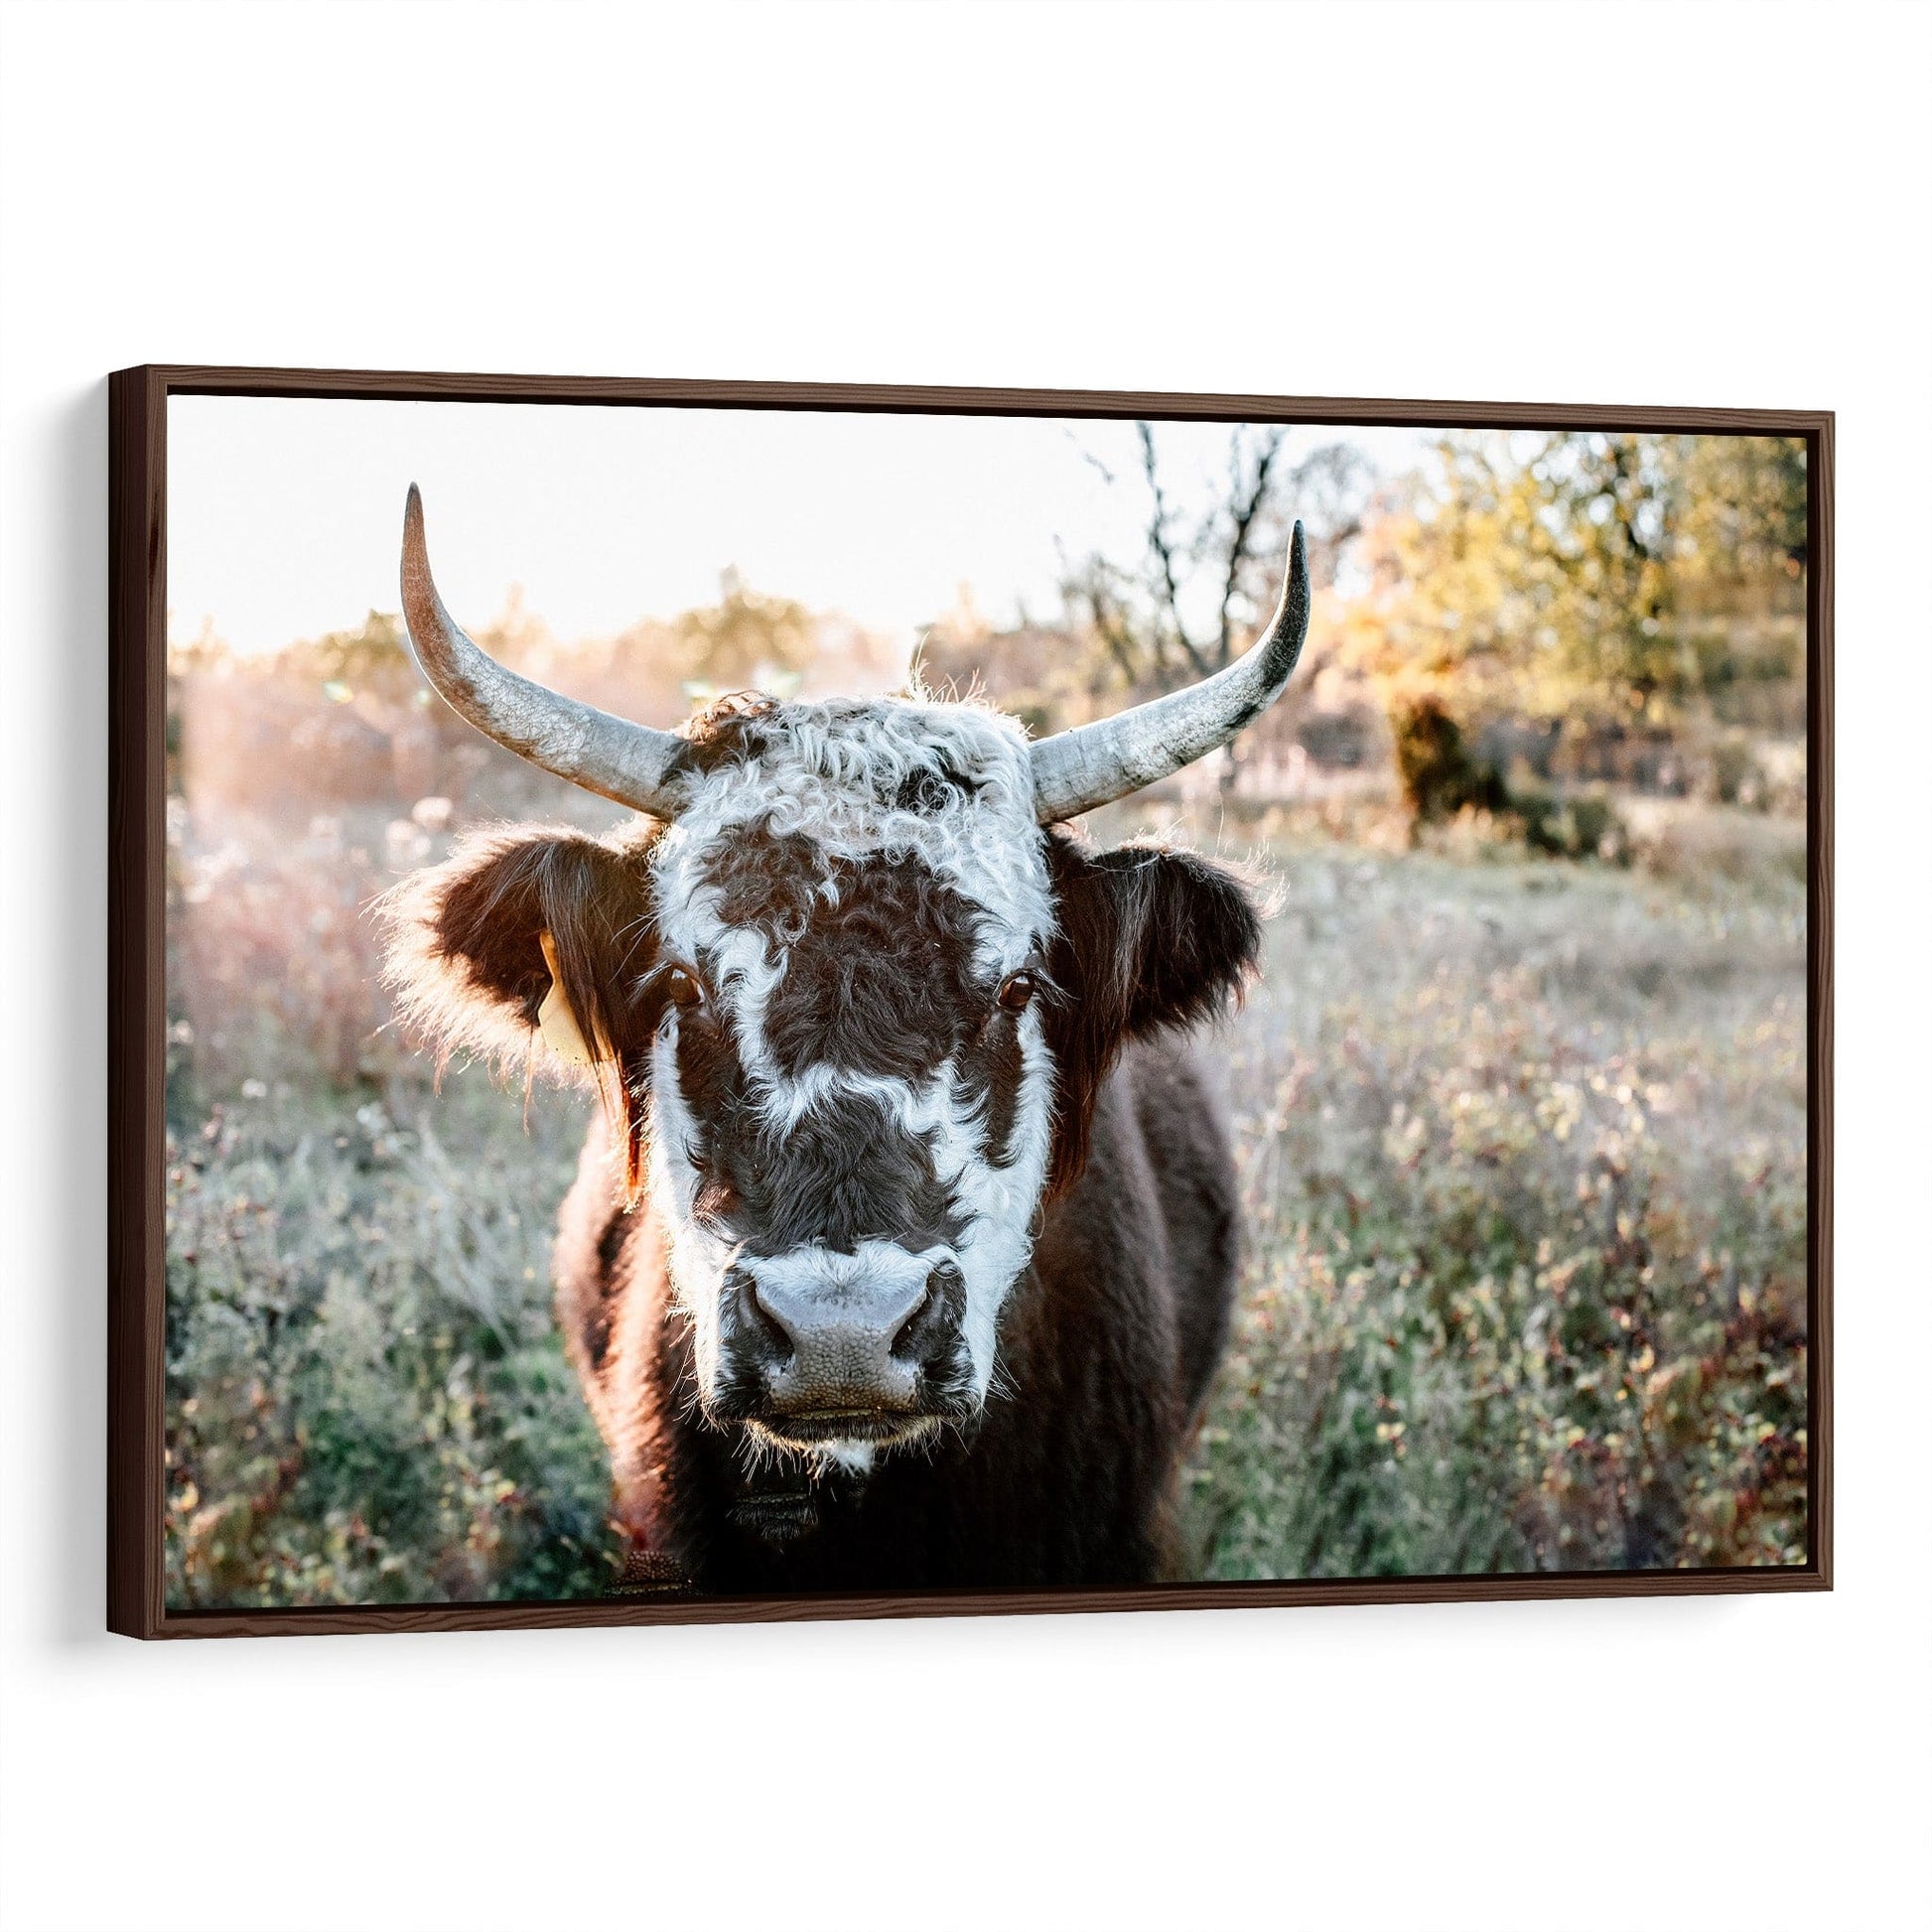 Highland Cow Canvas Print - Black and White Cow Canvas-Walnut Frame / 12 x 18 Inches Wall Art Teri James Photography